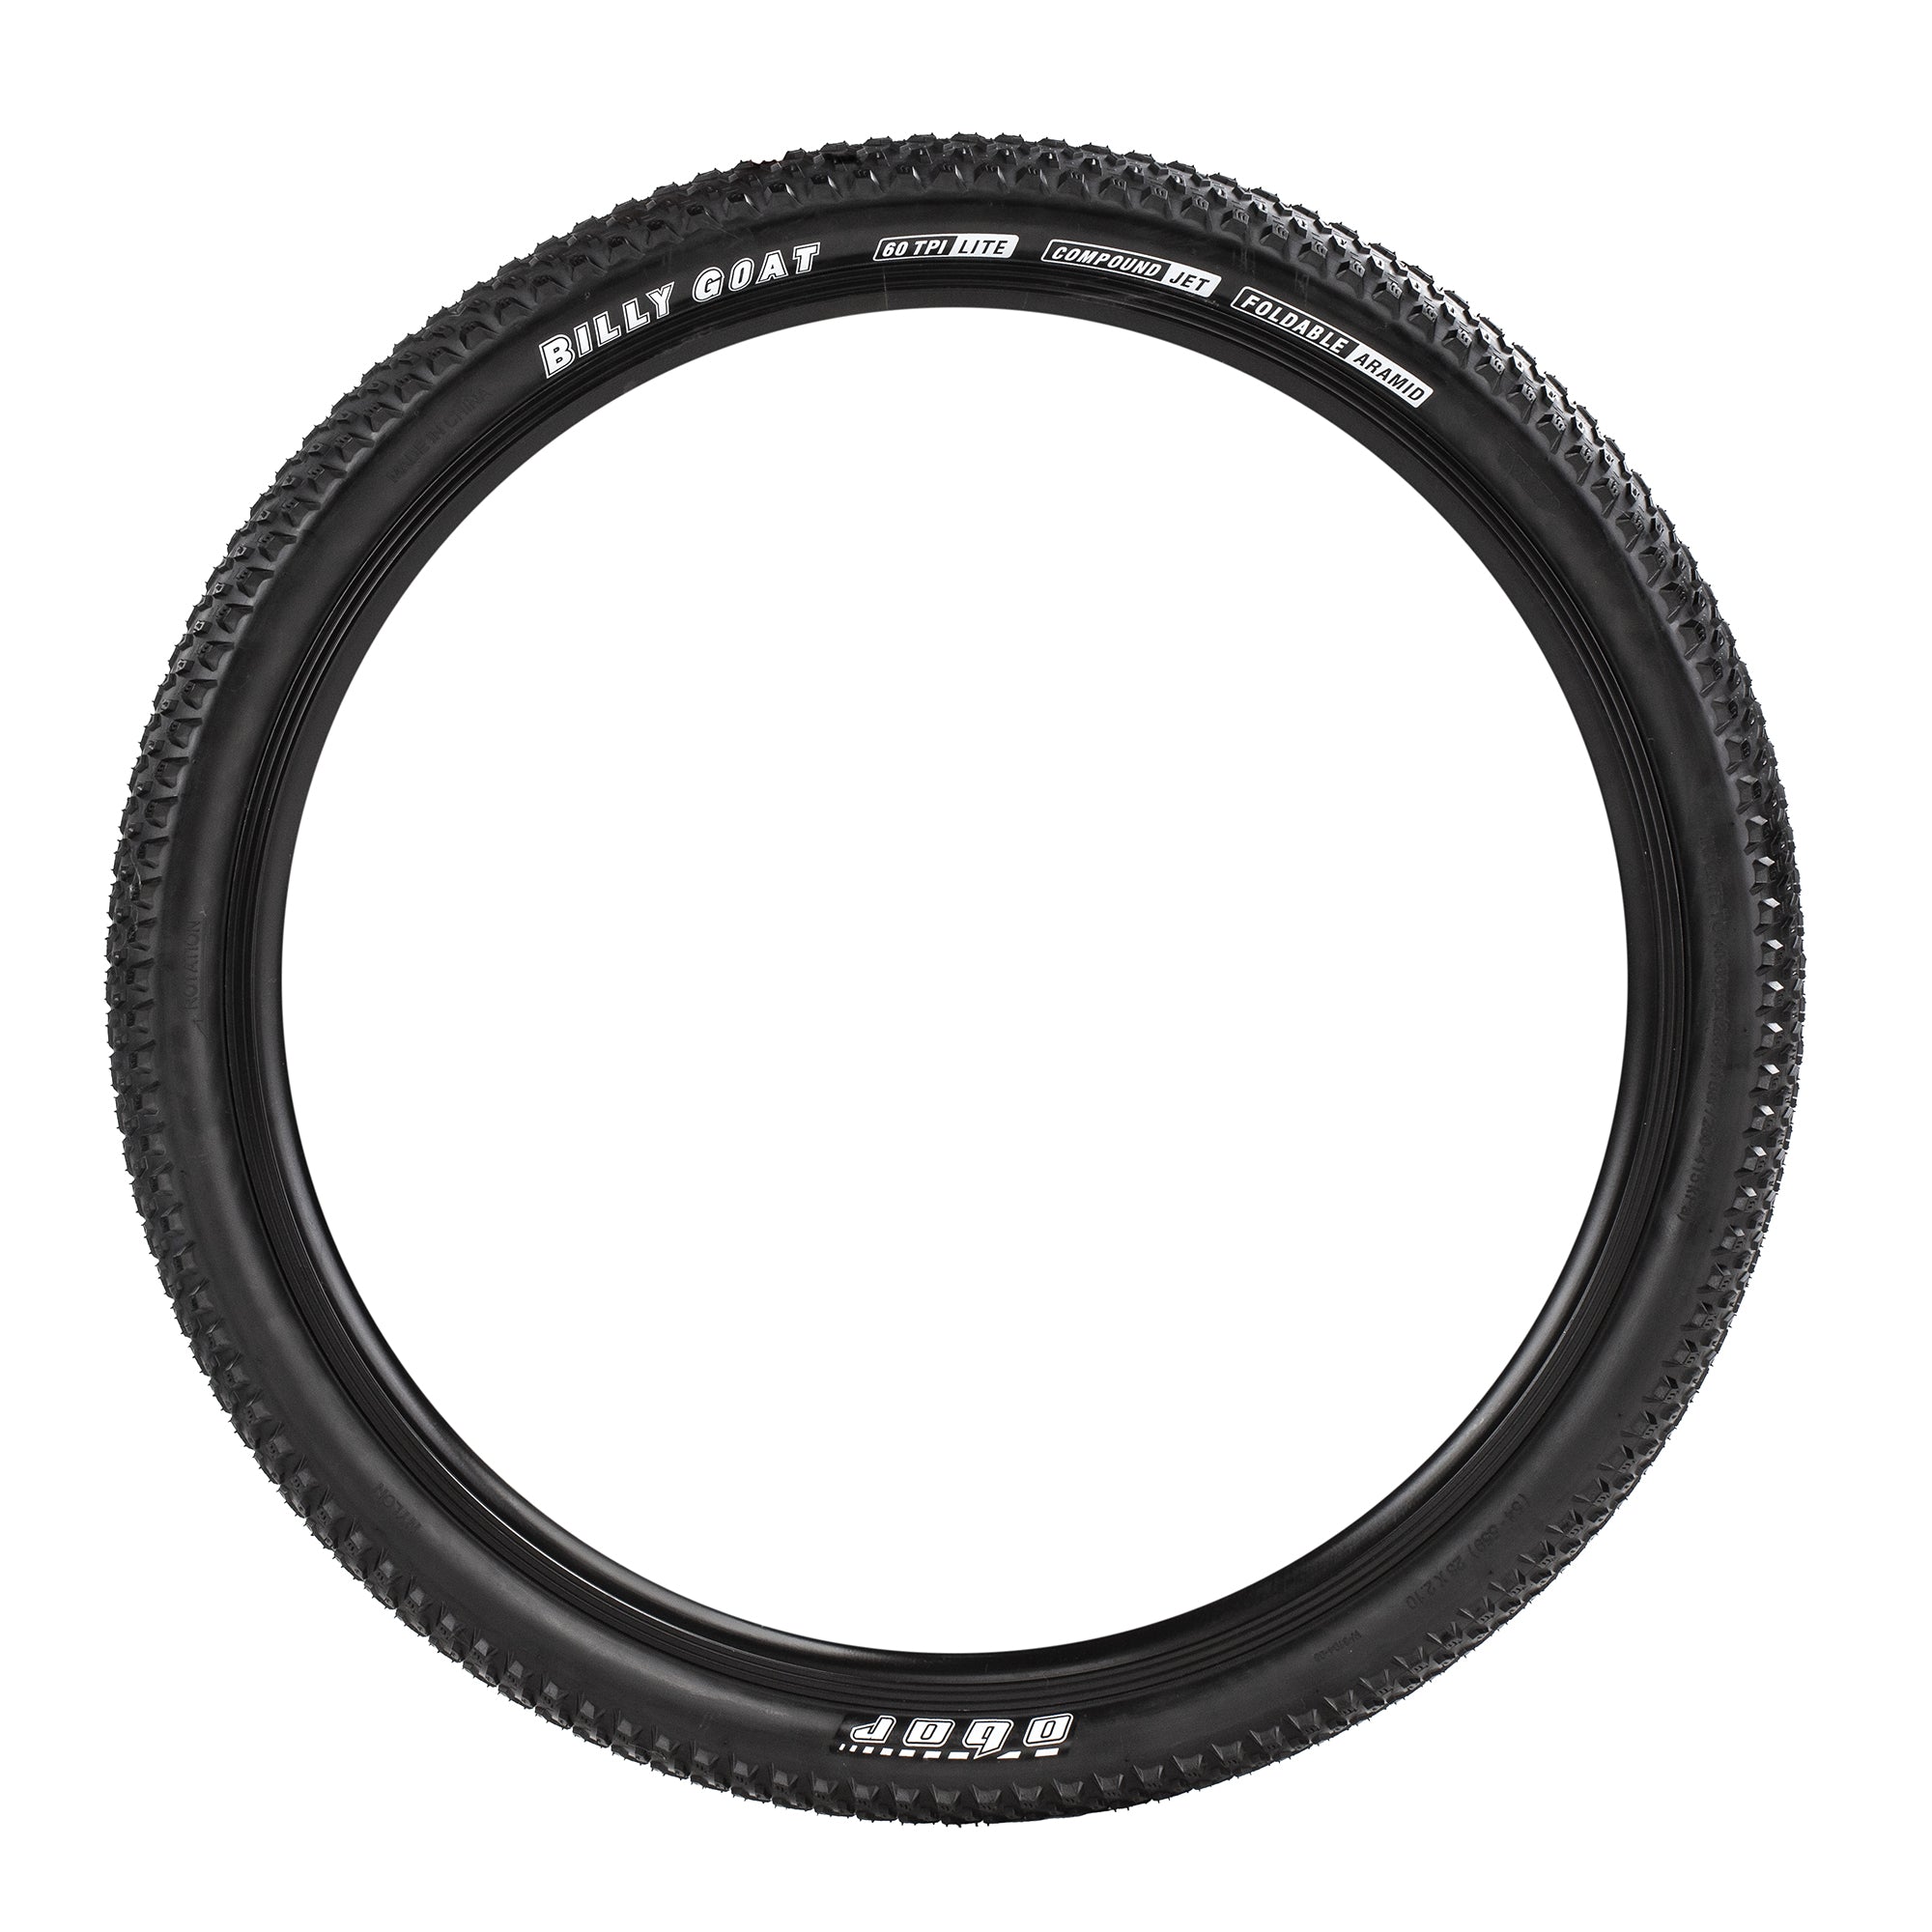 ZNTS 20 PACK Foldable mountain Bike Tire, 29x2.10 inch 25 pieces , Durable Mountain Bike Tire, , Fasting W1856107397